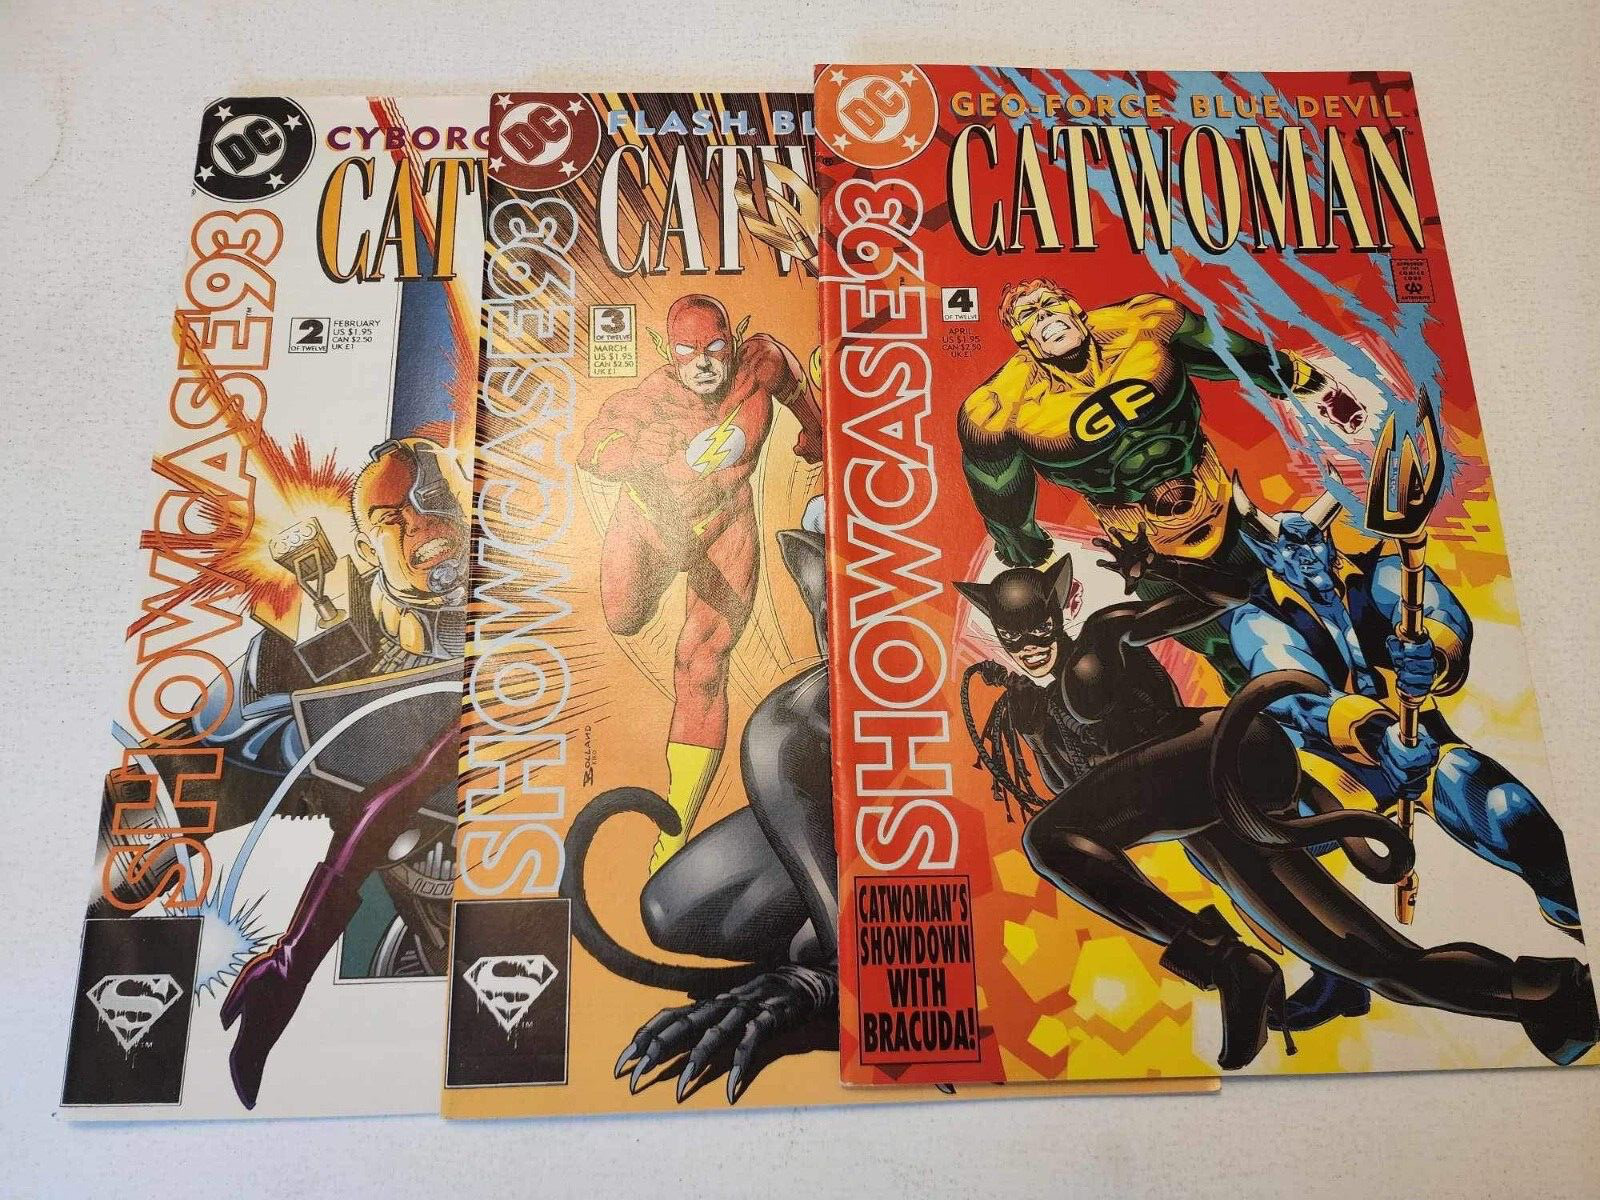 Lot of 3 Catwoman Showcase 93 comics # 2 3 4 1993 DC VF+ to NM